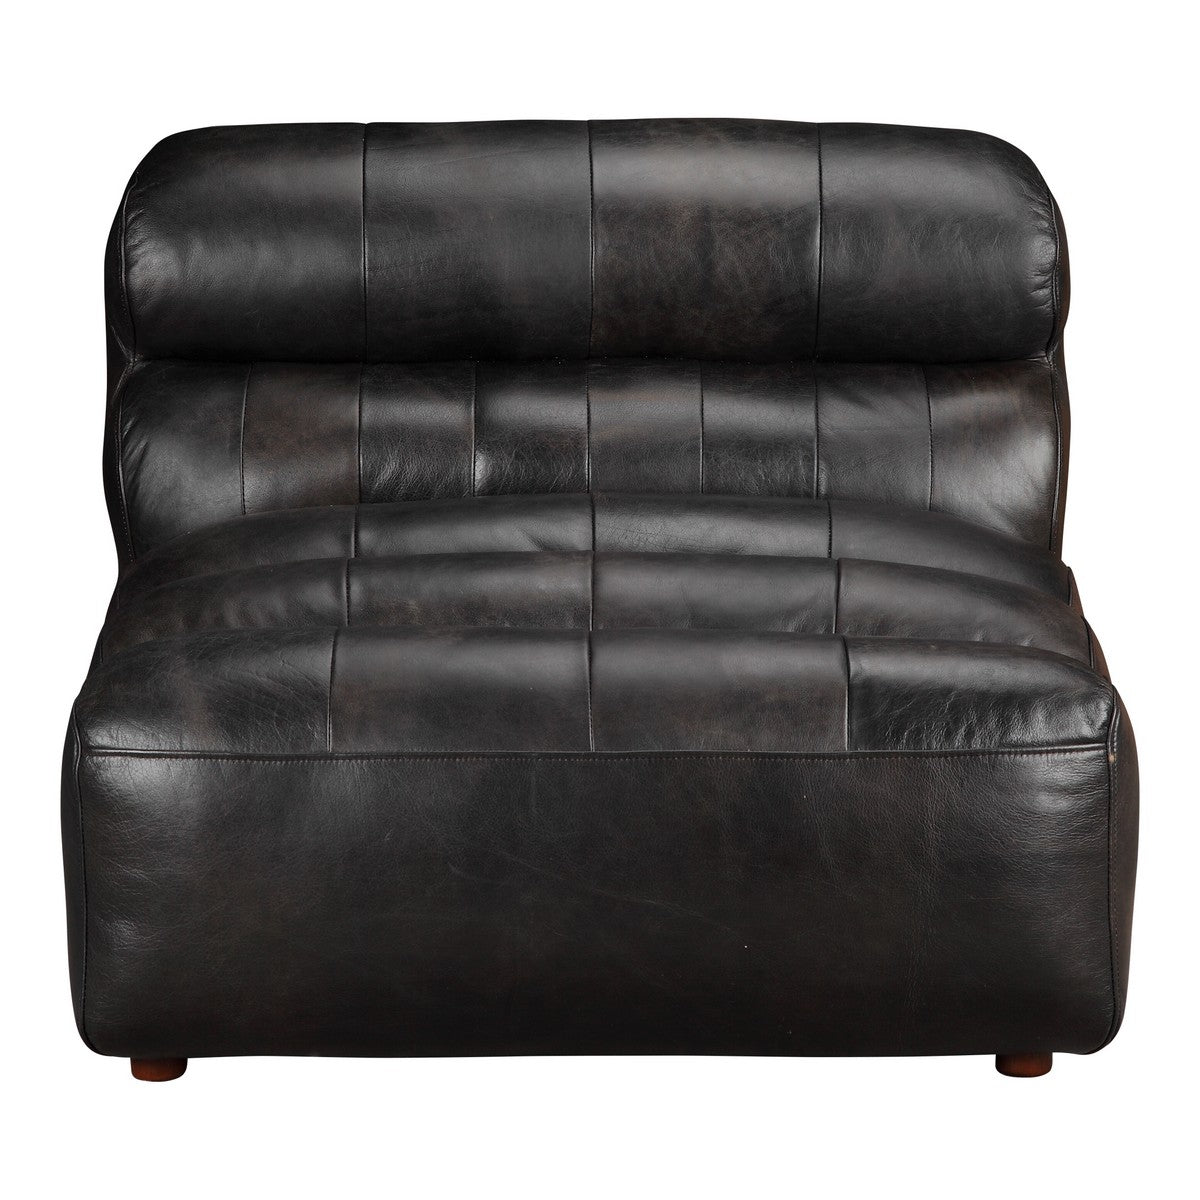 Moe's Home Collection Ramsay Leather Armless Chair Antique Black - QN-1009-01